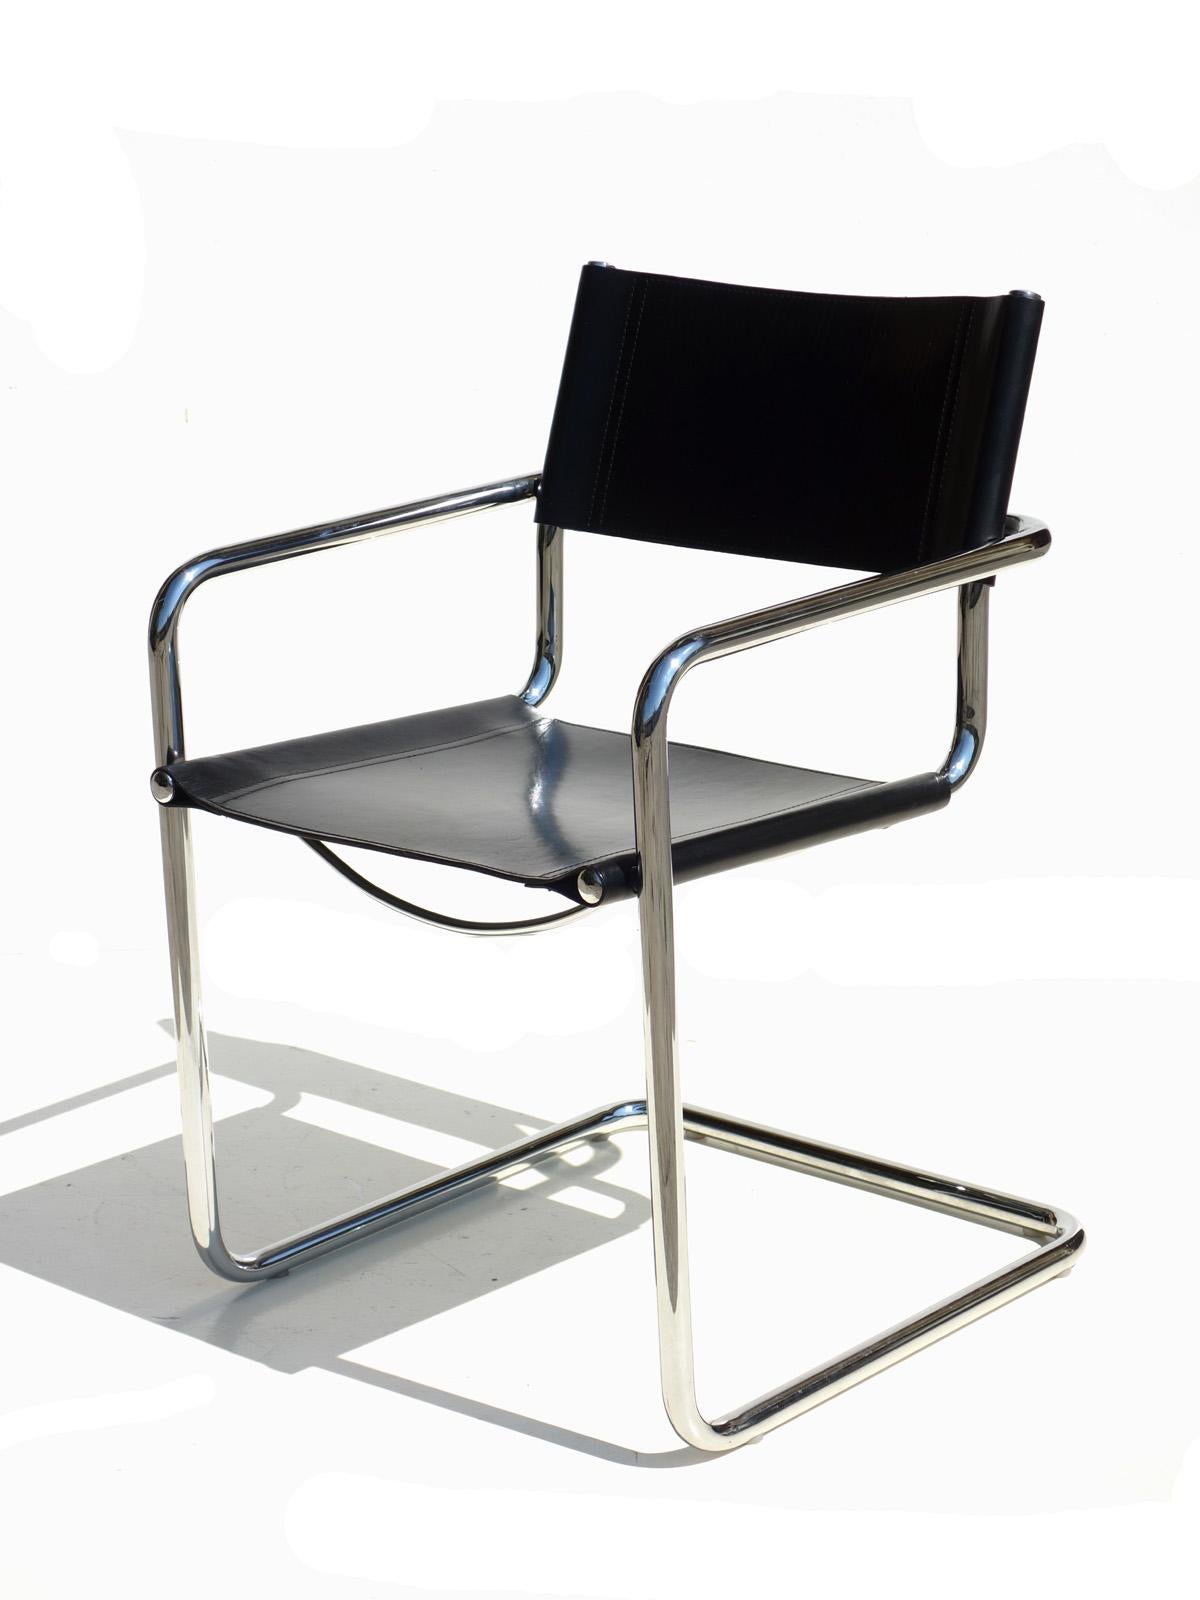 MG5 by Matteo Grassi, 1970.
Black leather and chrome and tubular steel with chrome plating.
 